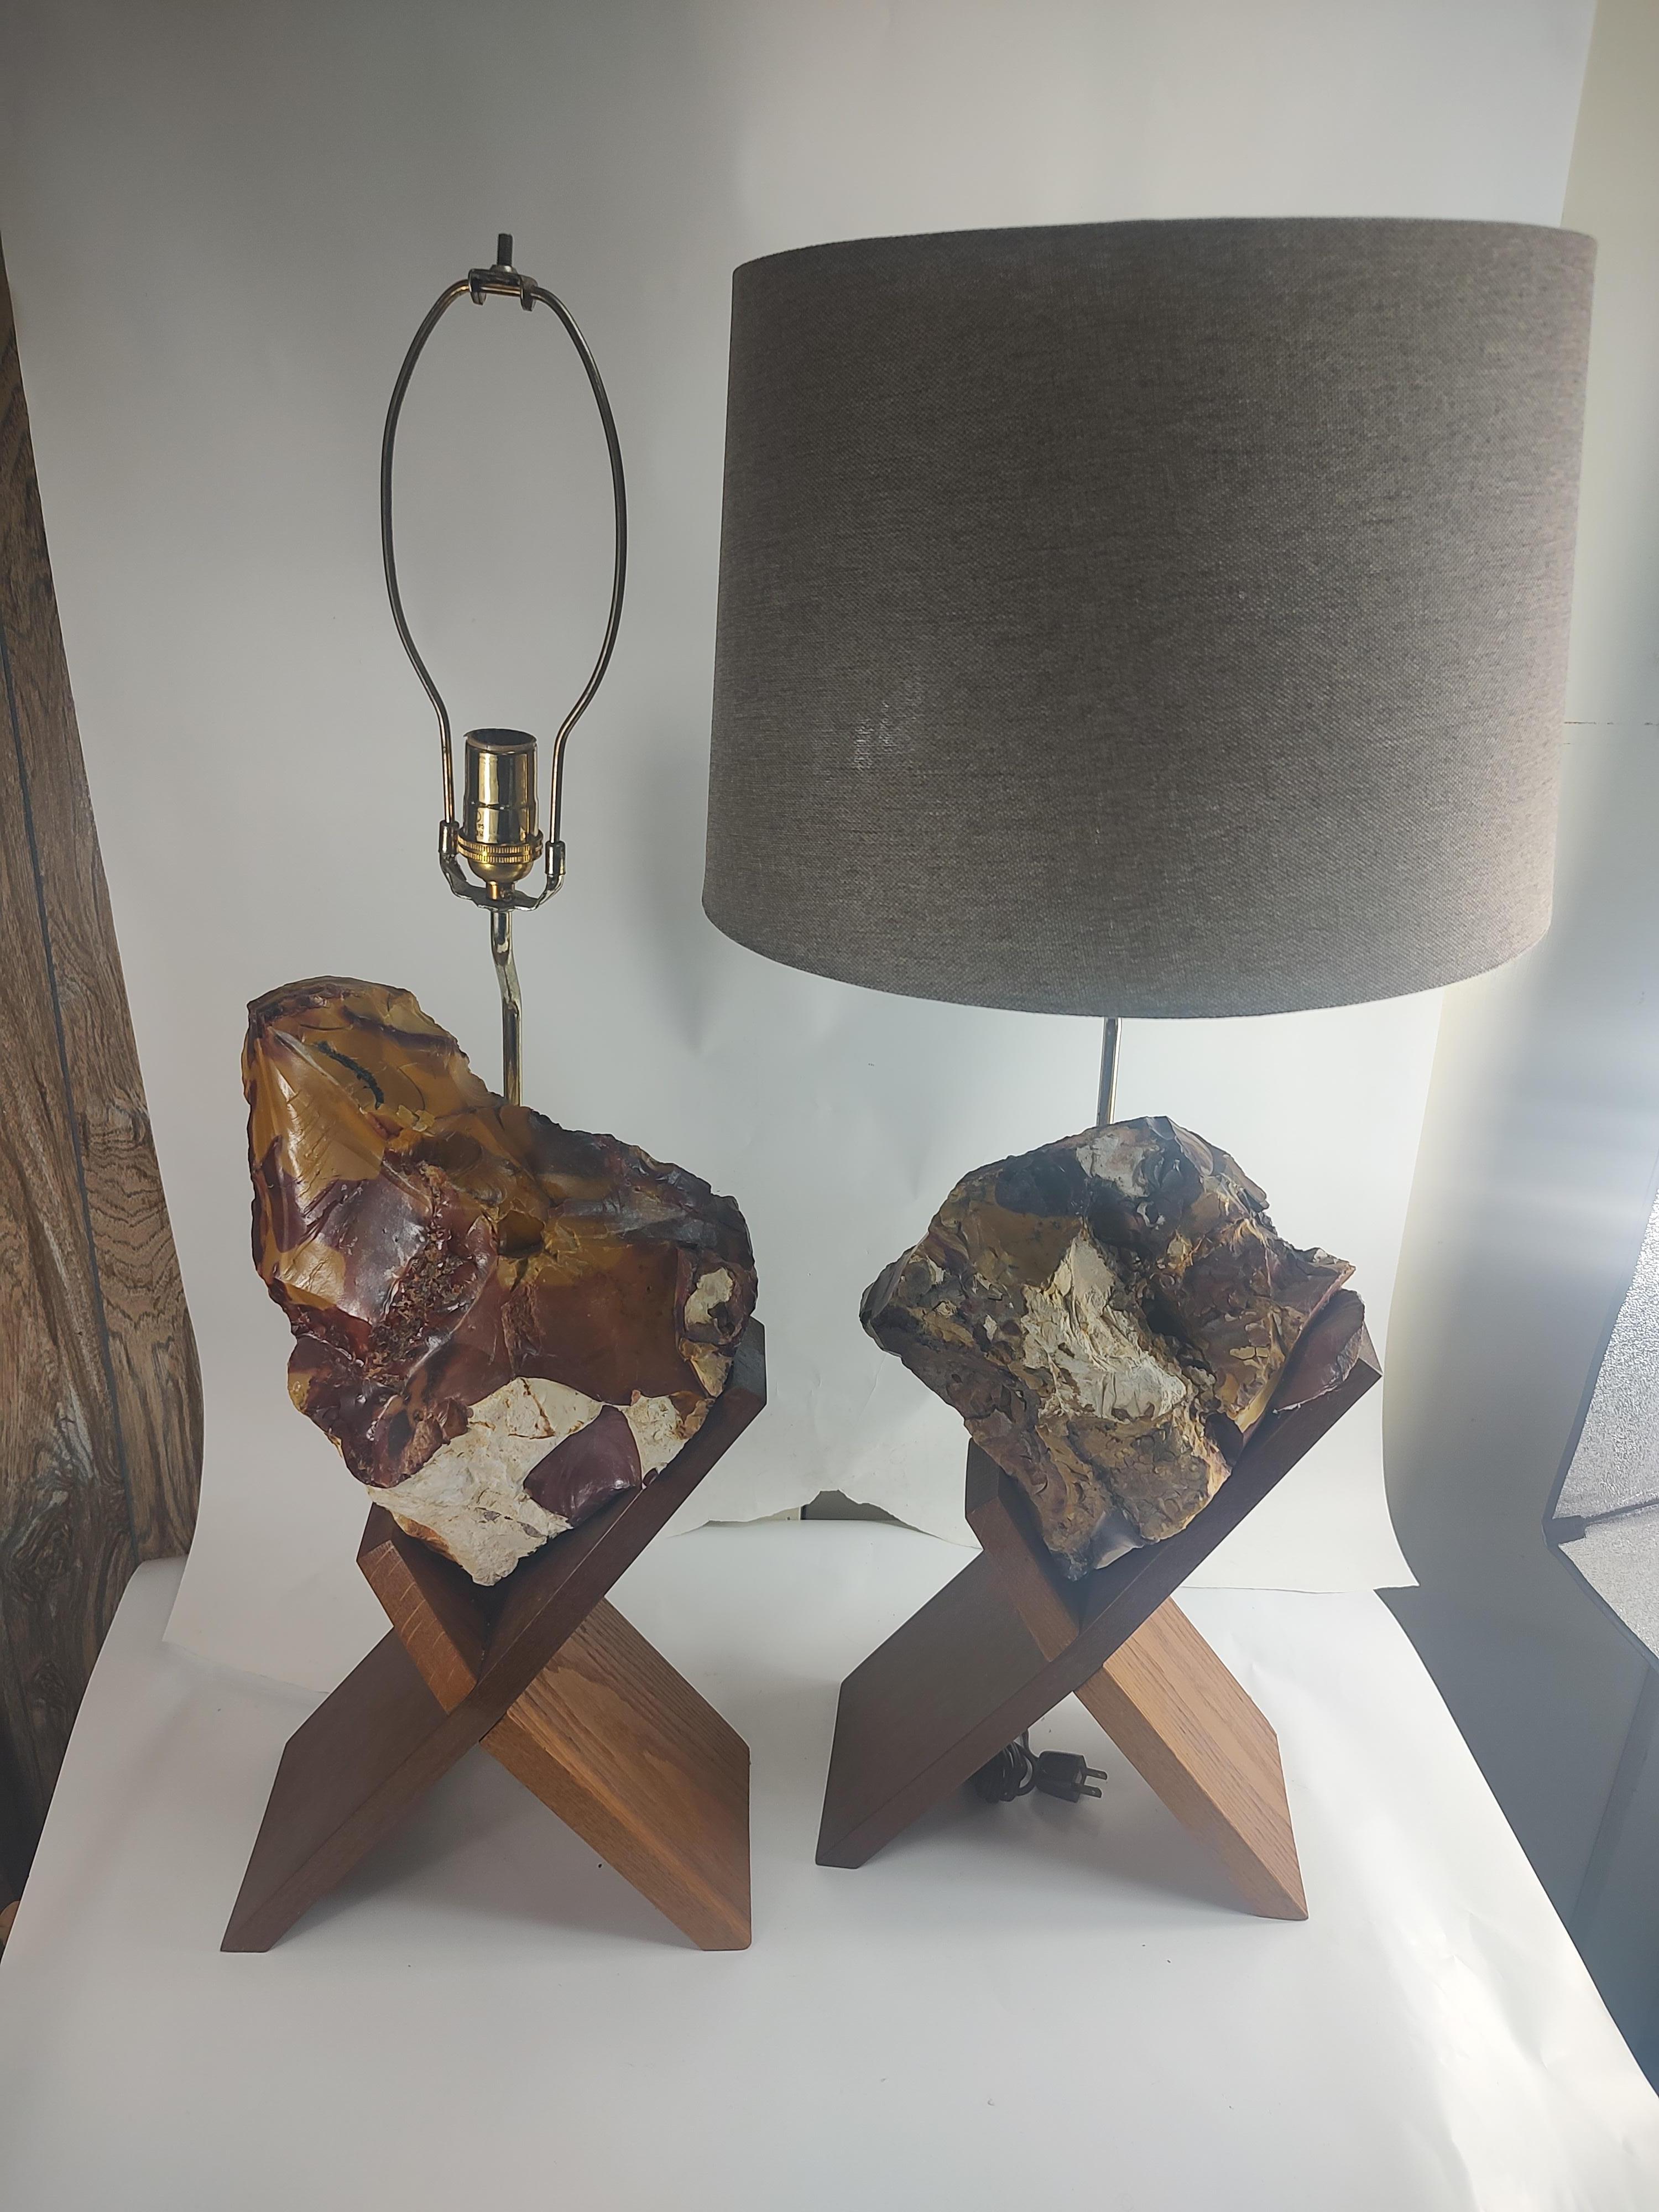 Pair of Mid Century Modern Sculptural Raw Onyx & Teak Table Lamps For Sale 1